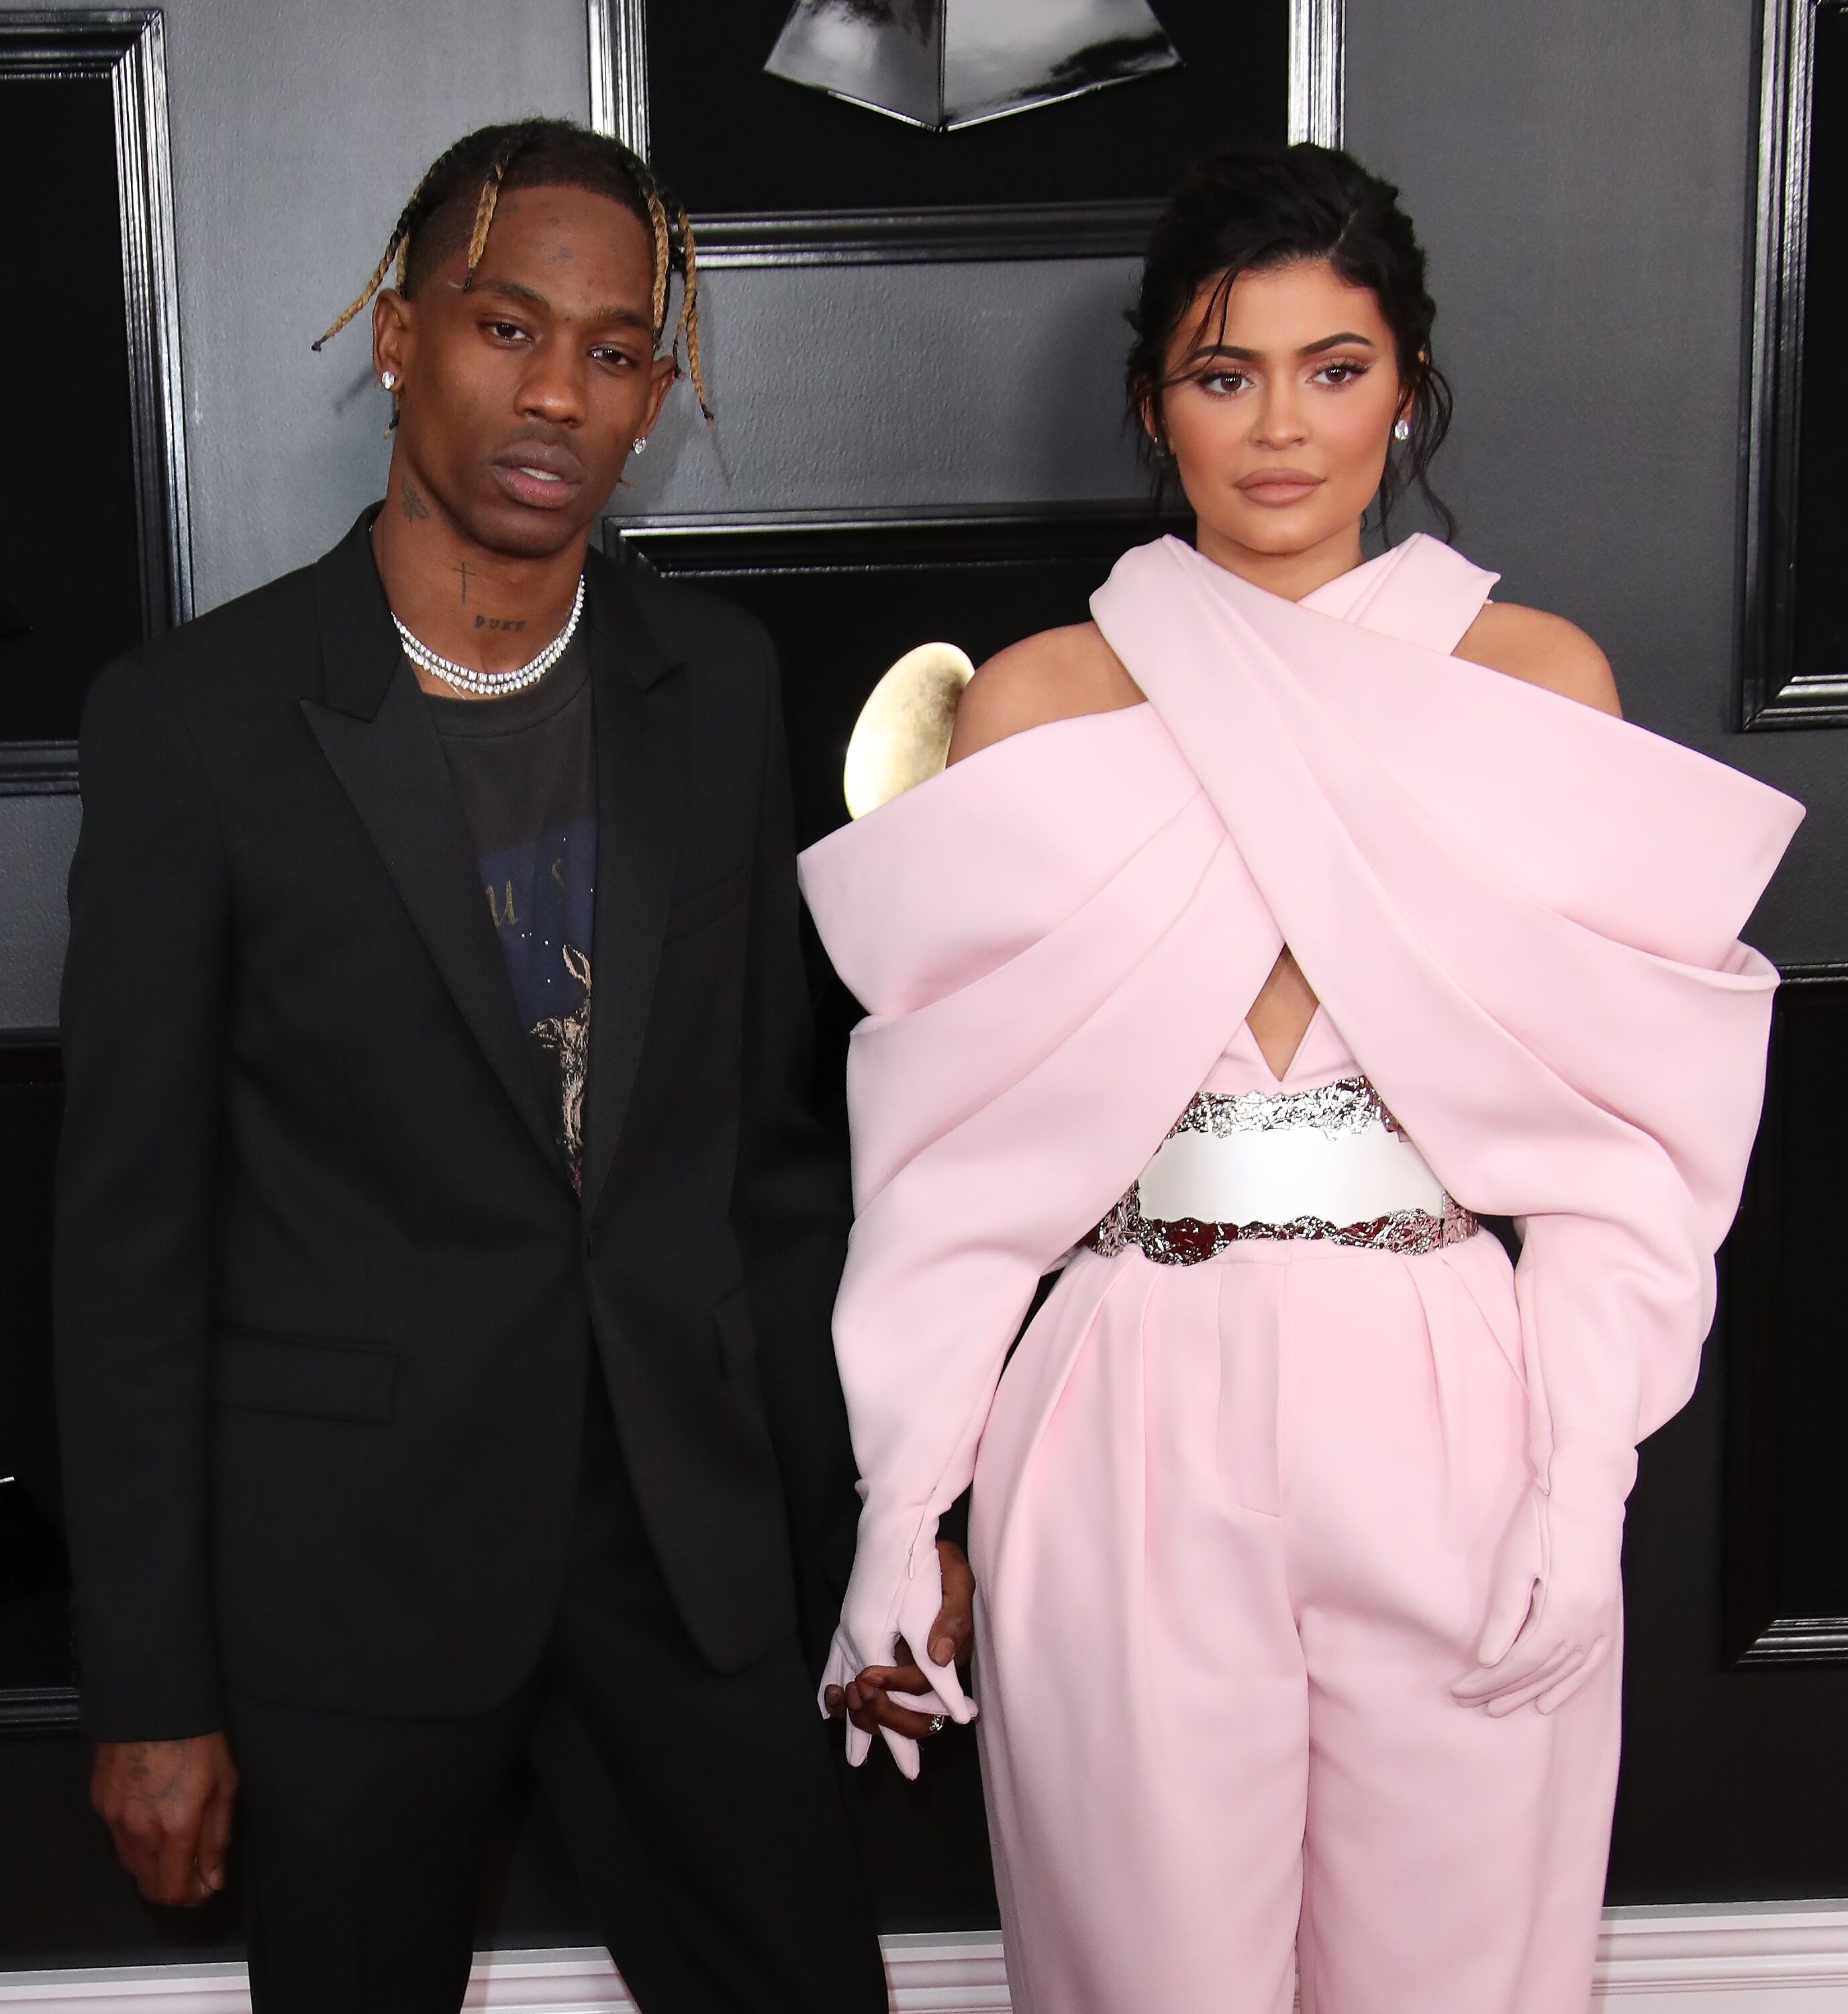 Travis Scott and Kylie Jenner at the 2019 Grammy Awards | Source: Getty Images/GlobalImagesUkraine